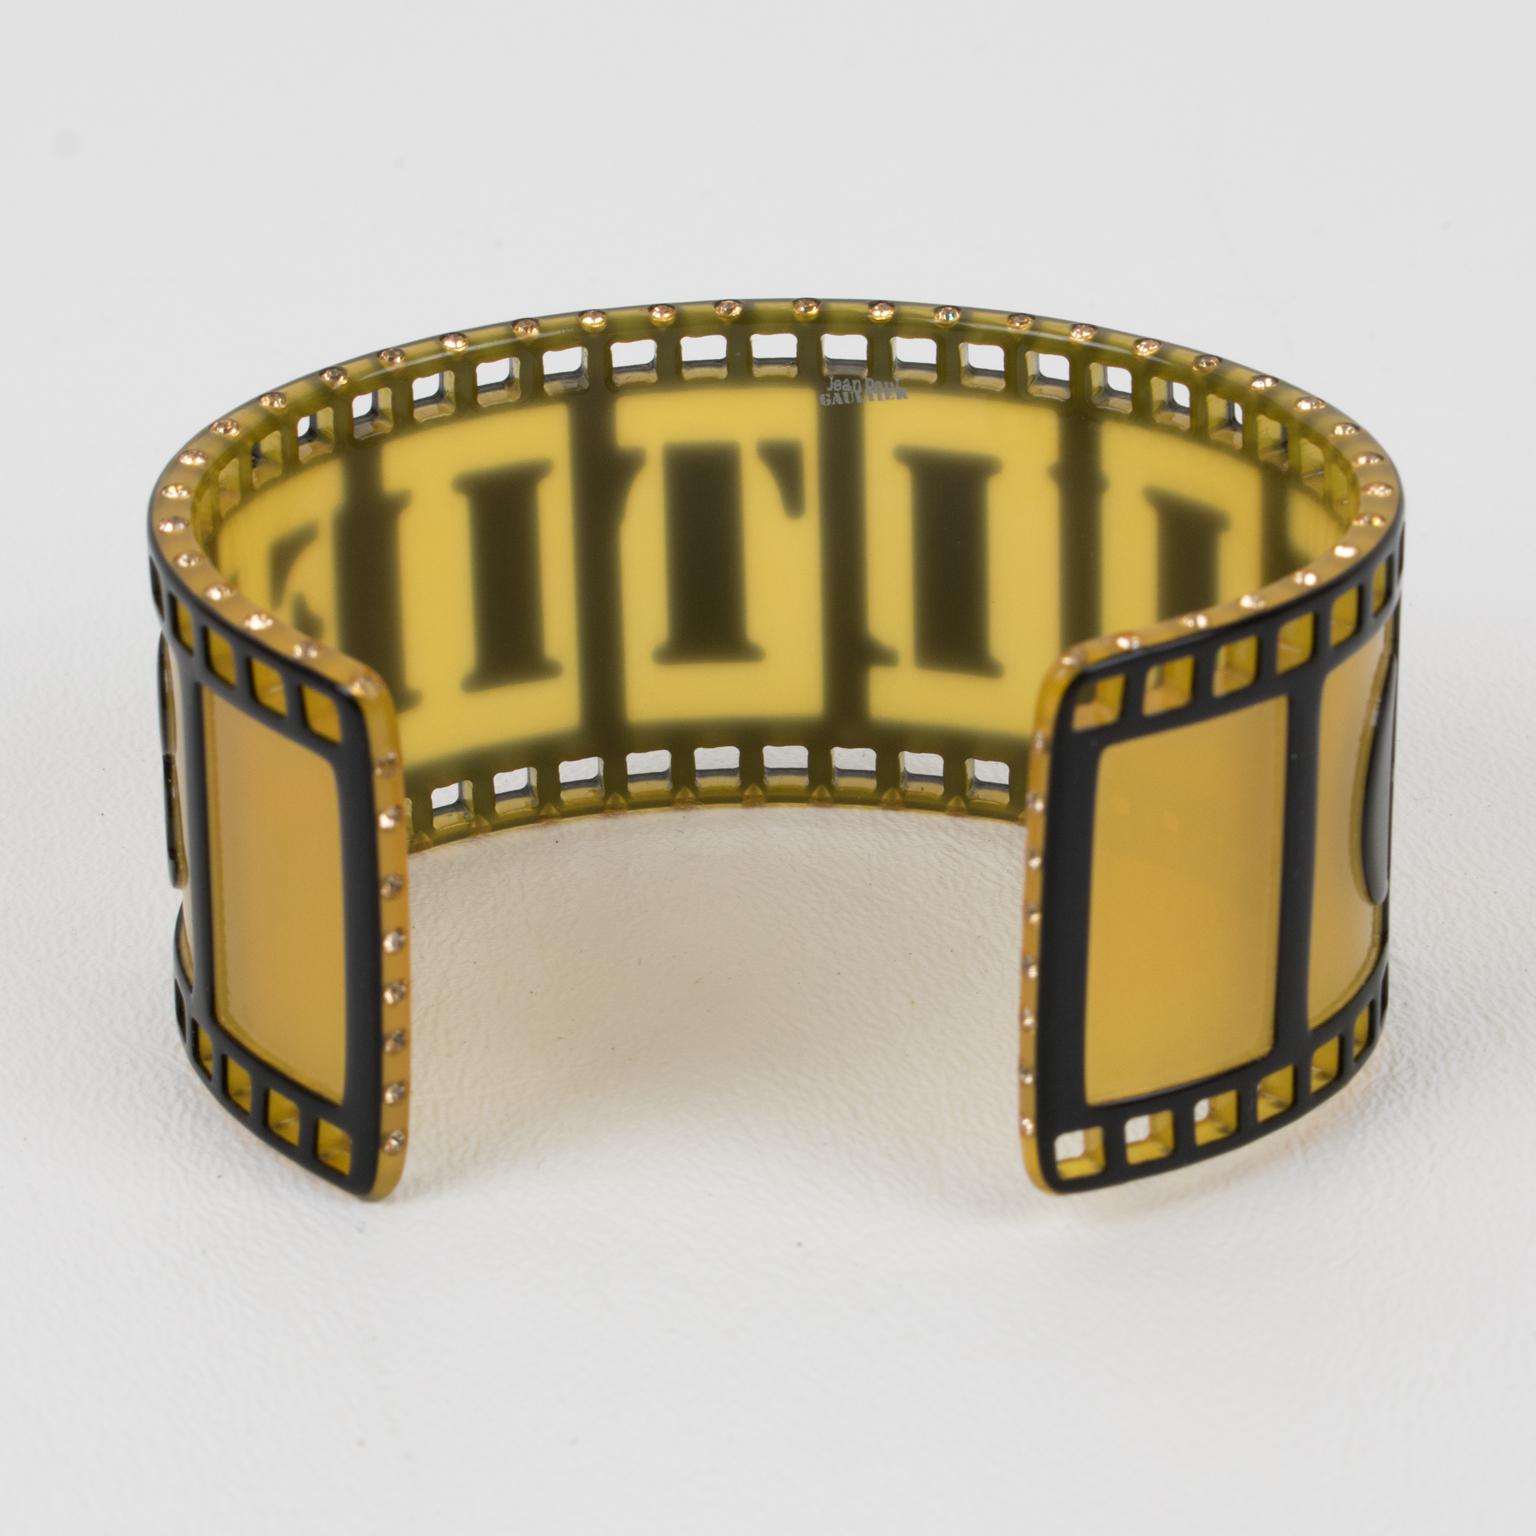 Jean Paul Gaultier Runway Black and Yellow Resin Cuff Bracelet Old Film Strip For Sale 1